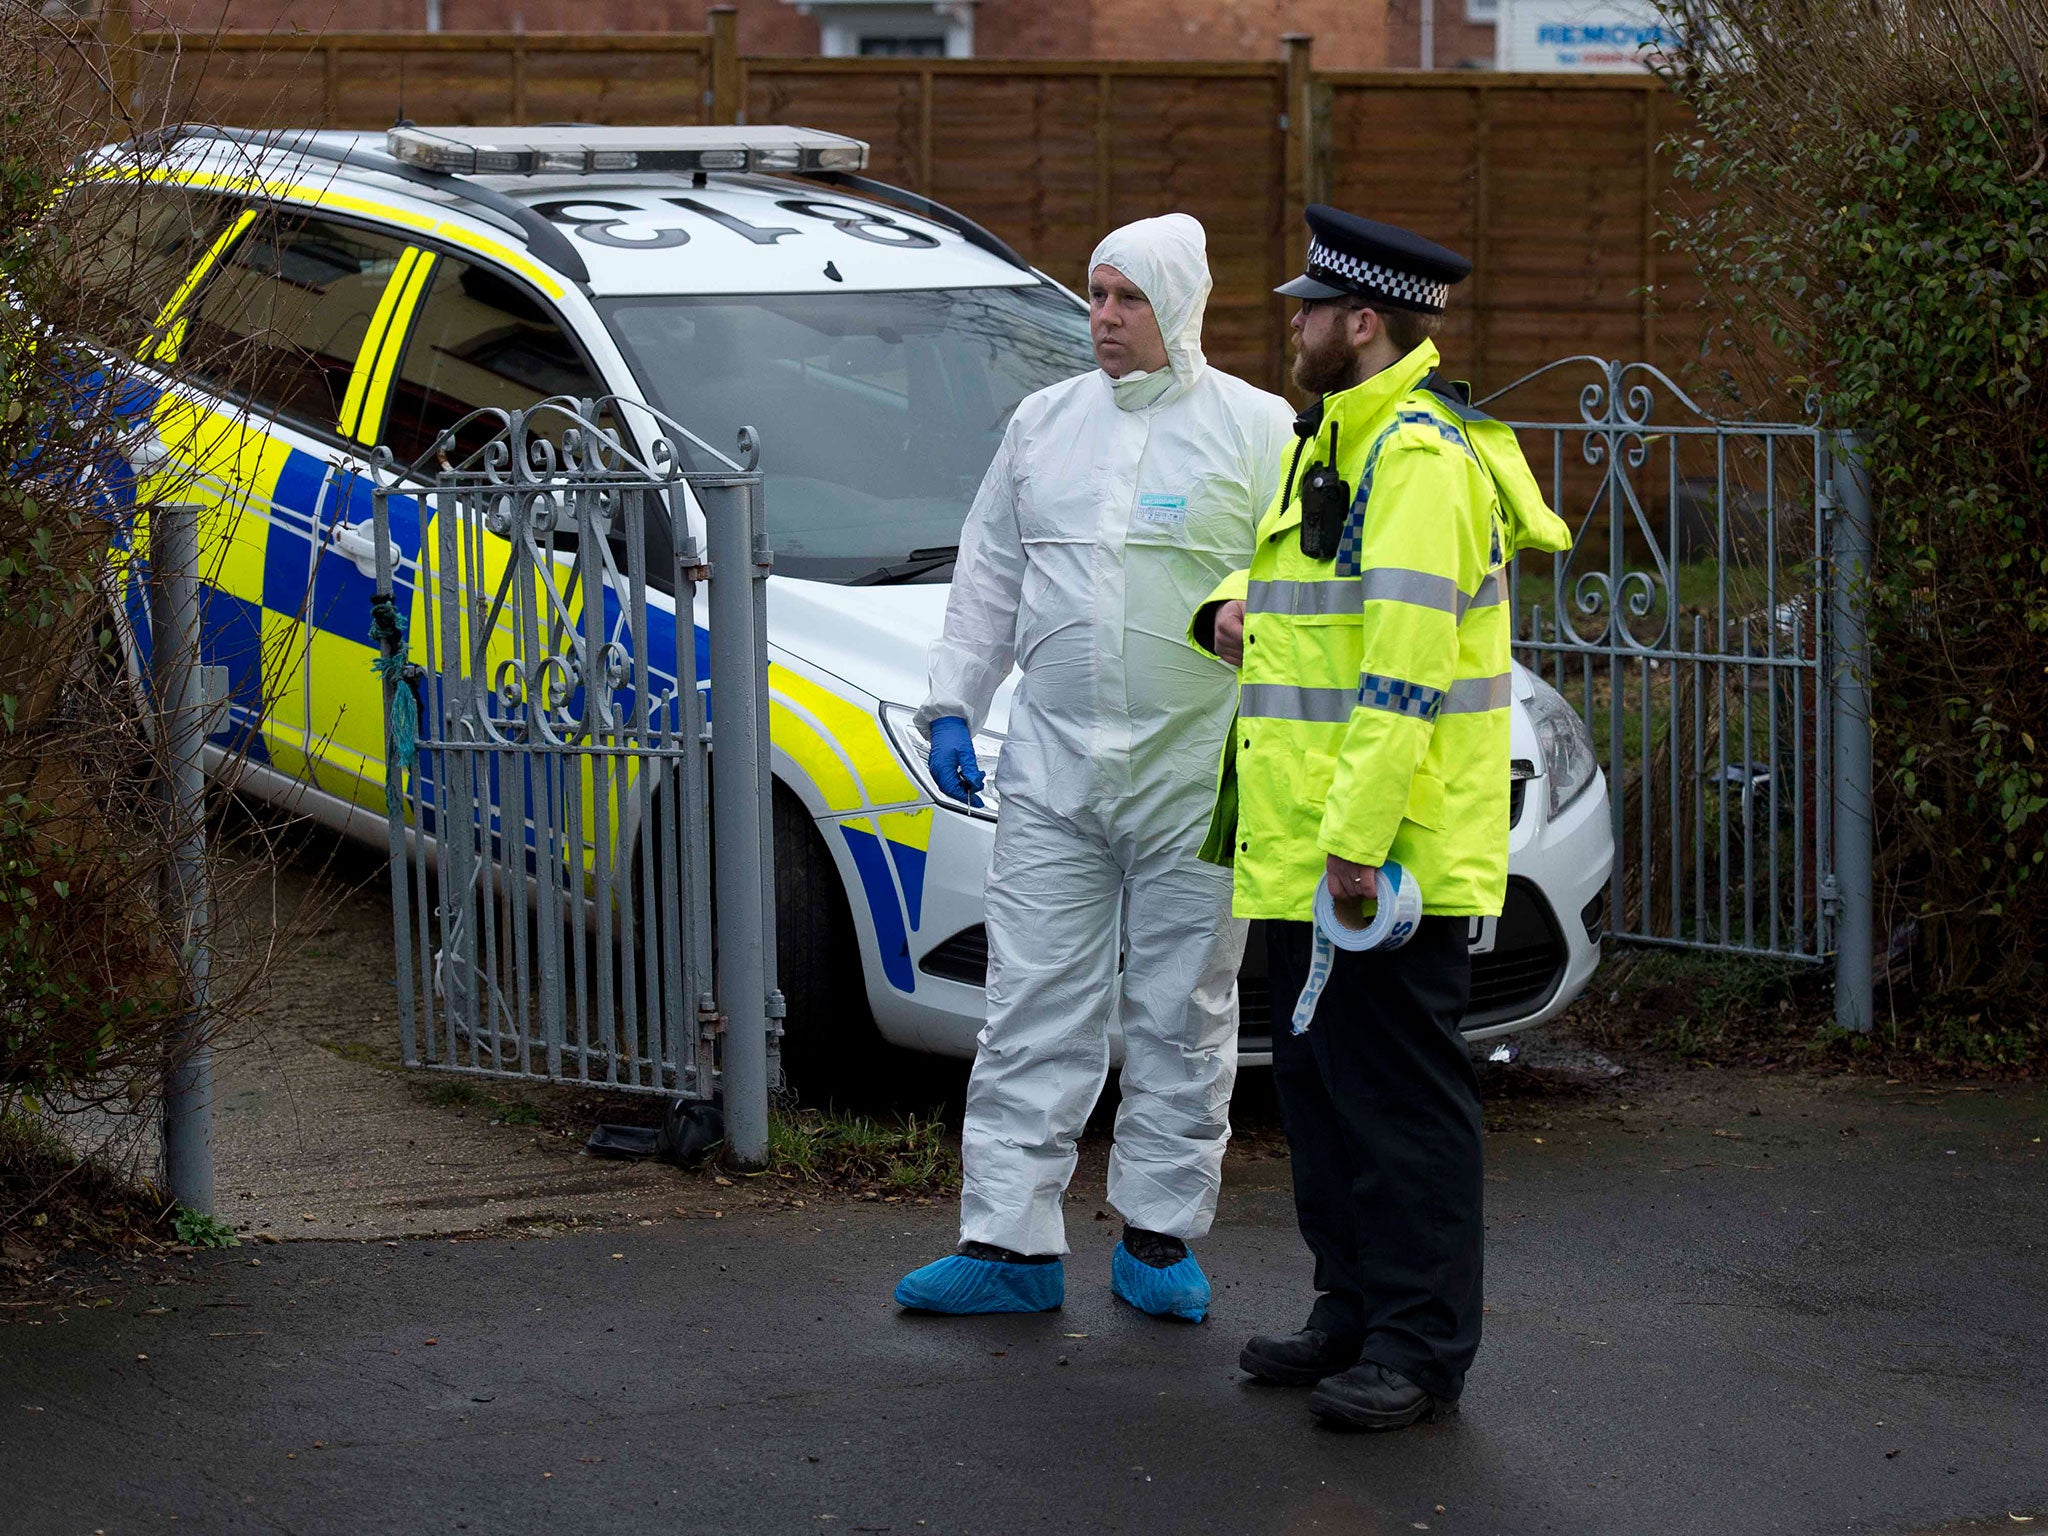 Researchers say the way crime has been calculated in the UK is wrong